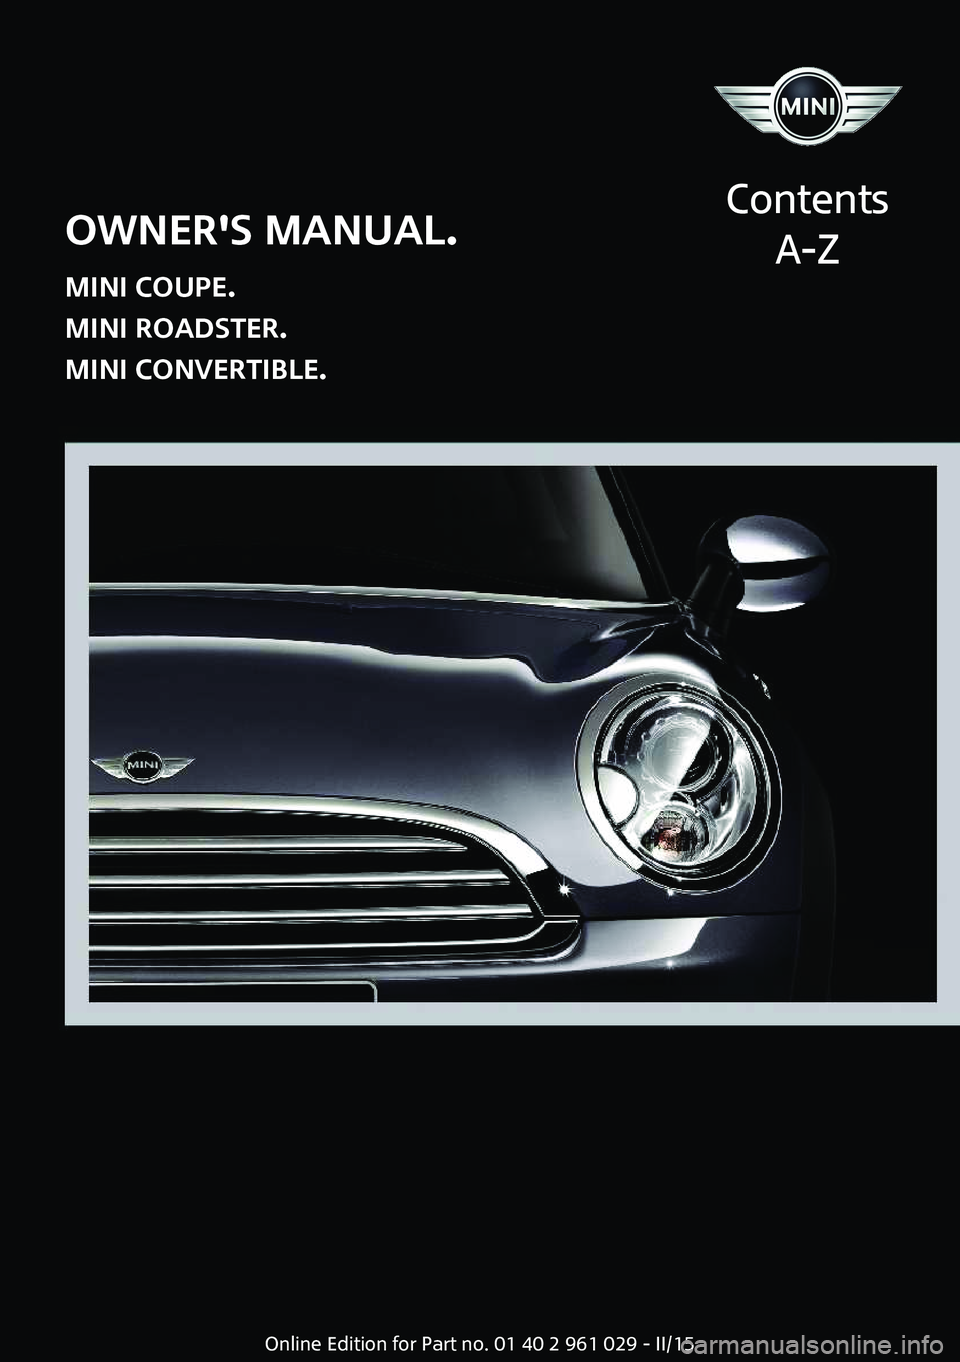 MINI COOPER CONVERTIBLE 2015  Owners Manual OWNER'S MANUAL.
MINI COUPE.
MINI ROADSTER.
MINI CONVERTIBLE.
Contents
A-ZOnline Edition for Part no. 01 40 2 961 029 - II/15  